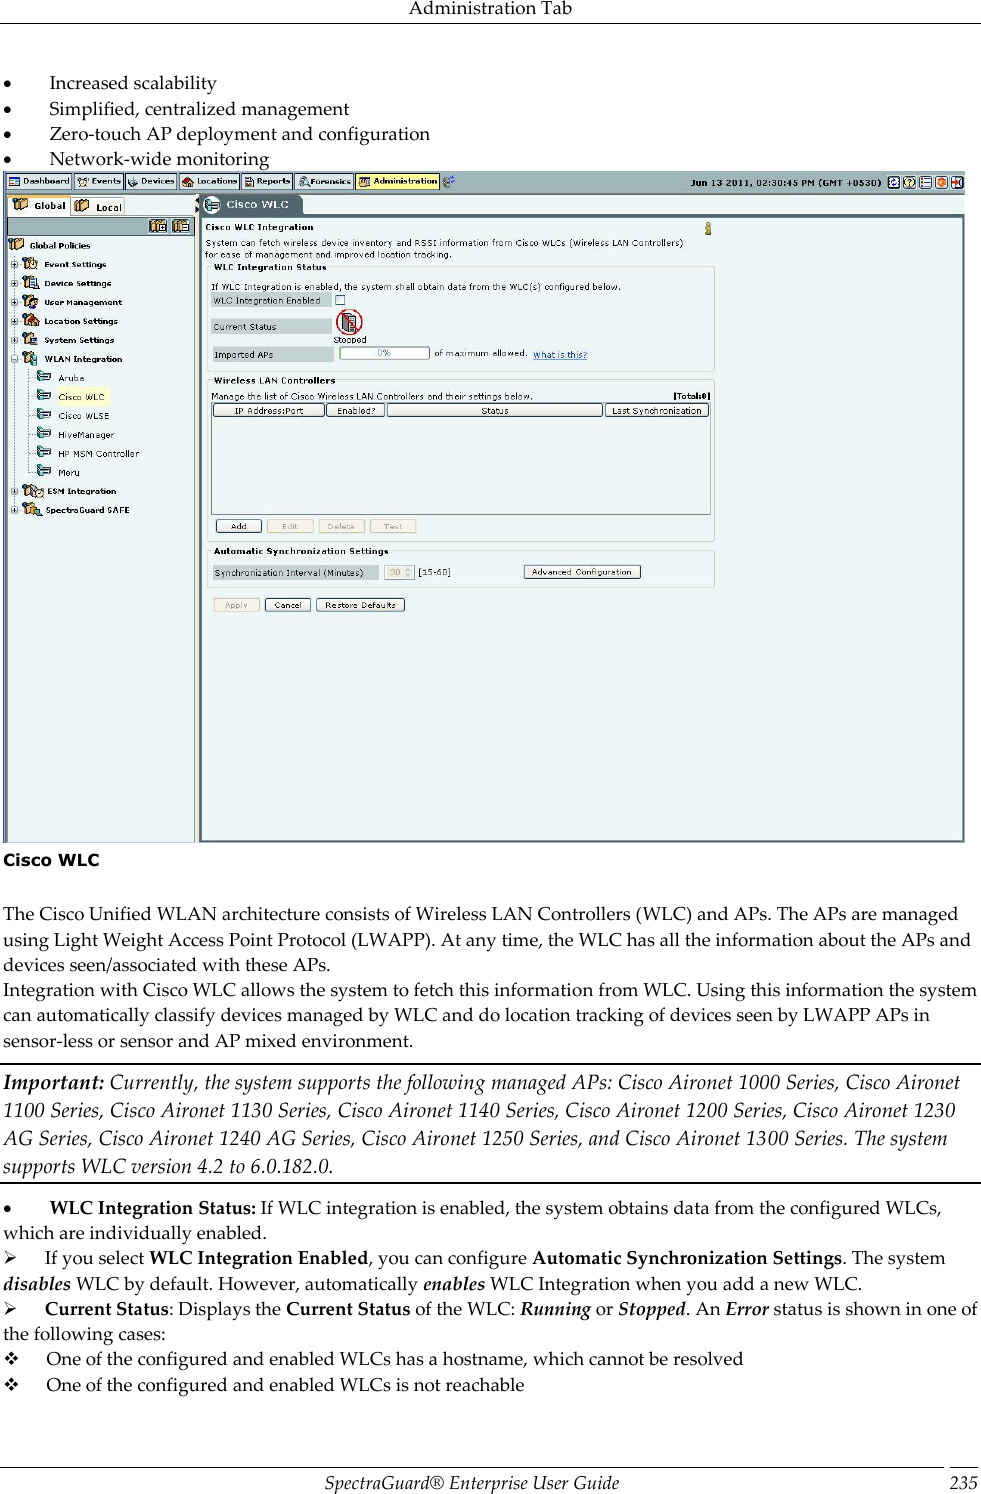 Administration Tab SpectraGuard®  Enterprise User Guide 235           Increased scalability           Simplified, centralized management           Zero-touch AP deployment and configuration           Network-wide monitoring  Cisco WLC   The Cisco Unified WLAN architecture consists of Wireless LAN Controllers (WLC) and APs. The APs are managed using Light Weight Access Point Protocol (LWAPP). At any time, the WLC has all the information about the APs and devices seen/associated with these APs. Integration with Cisco WLC allows the system to fetch this information from WLC. Using this information the system can automatically classify devices managed by WLC and do location tracking of devices seen by LWAPP APs in sensor-less or sensor and AP mixed environment. Important: Currently, the system supports the following managed APs: Cisco Aironet 1000 Series, Cisco Aironet 1100 Series, Cisco Aironet 1130 Series, Cisco Aironet 1140 Series, Cisco Aironet 1200 Series, Cisco Aironet 1230 AG Series, Cisco Aironet 1240 AG Series, Cisco Aironet 1250 Series, and Cisco Aironet 1300 Series. The system supports WLC version 4.2 to 6.0.182.0.           WLC Integration Status: If WLC integration is enabled, the system obtains data from the configured WLCs, which are individually enabled.        If you select WLC Integration Enabled, you can configure Automatic Synchronization Settings. The system disables WLC by default. However, automatically enables WLC Integration when you add a new WLC.        Current Status: Displays the Current Status of the WLC: Running or Stopped. An Error status is shown in one of the following cases:        One of the configured and enabled WLCs has a hostname, which cannot be resolved        One of the configured and enabled WLCs is not reachable 